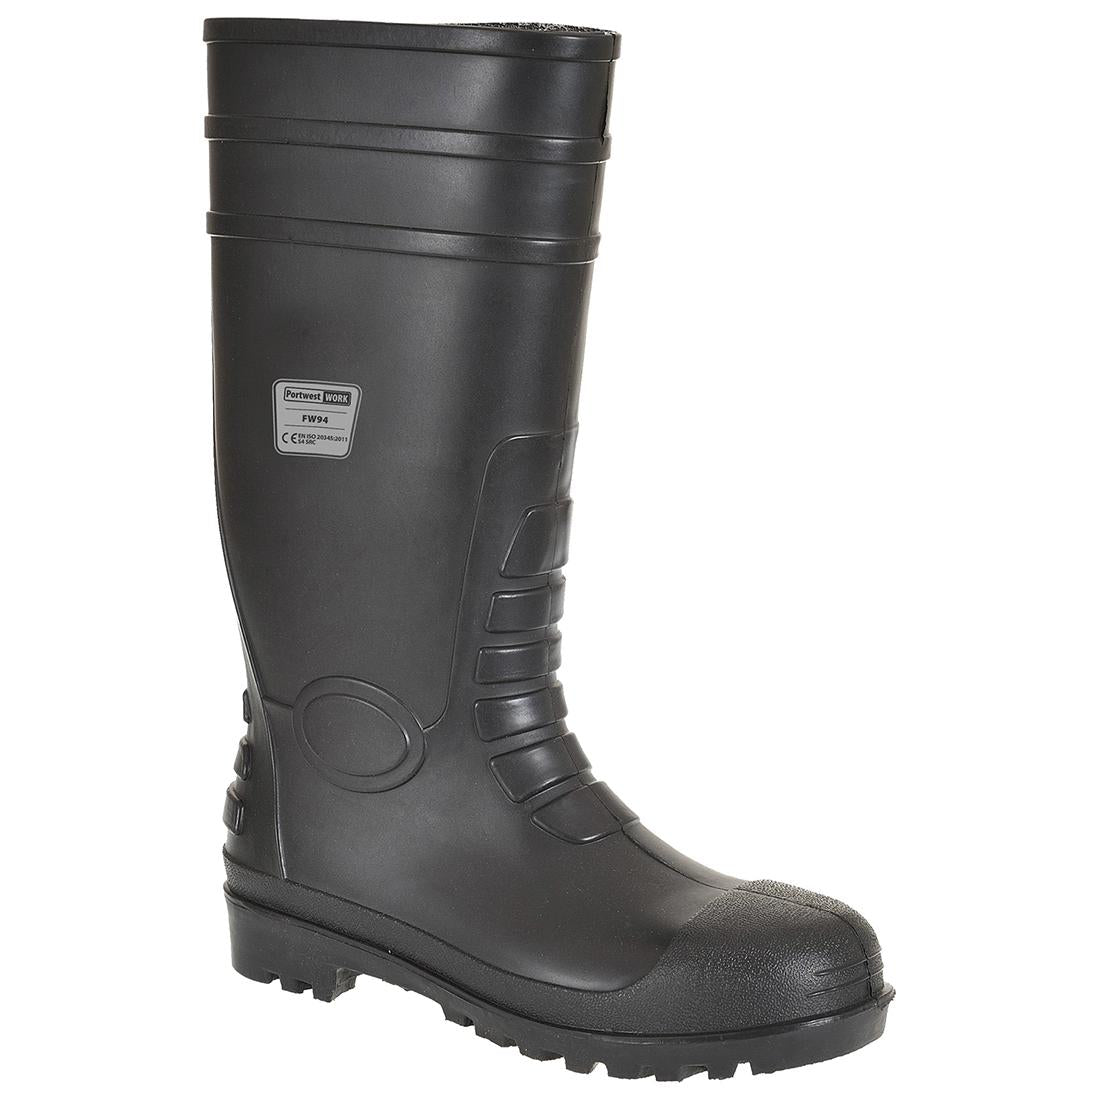 Portwest Mens Classic Safety Wellington Boots | Discounts on great Brands